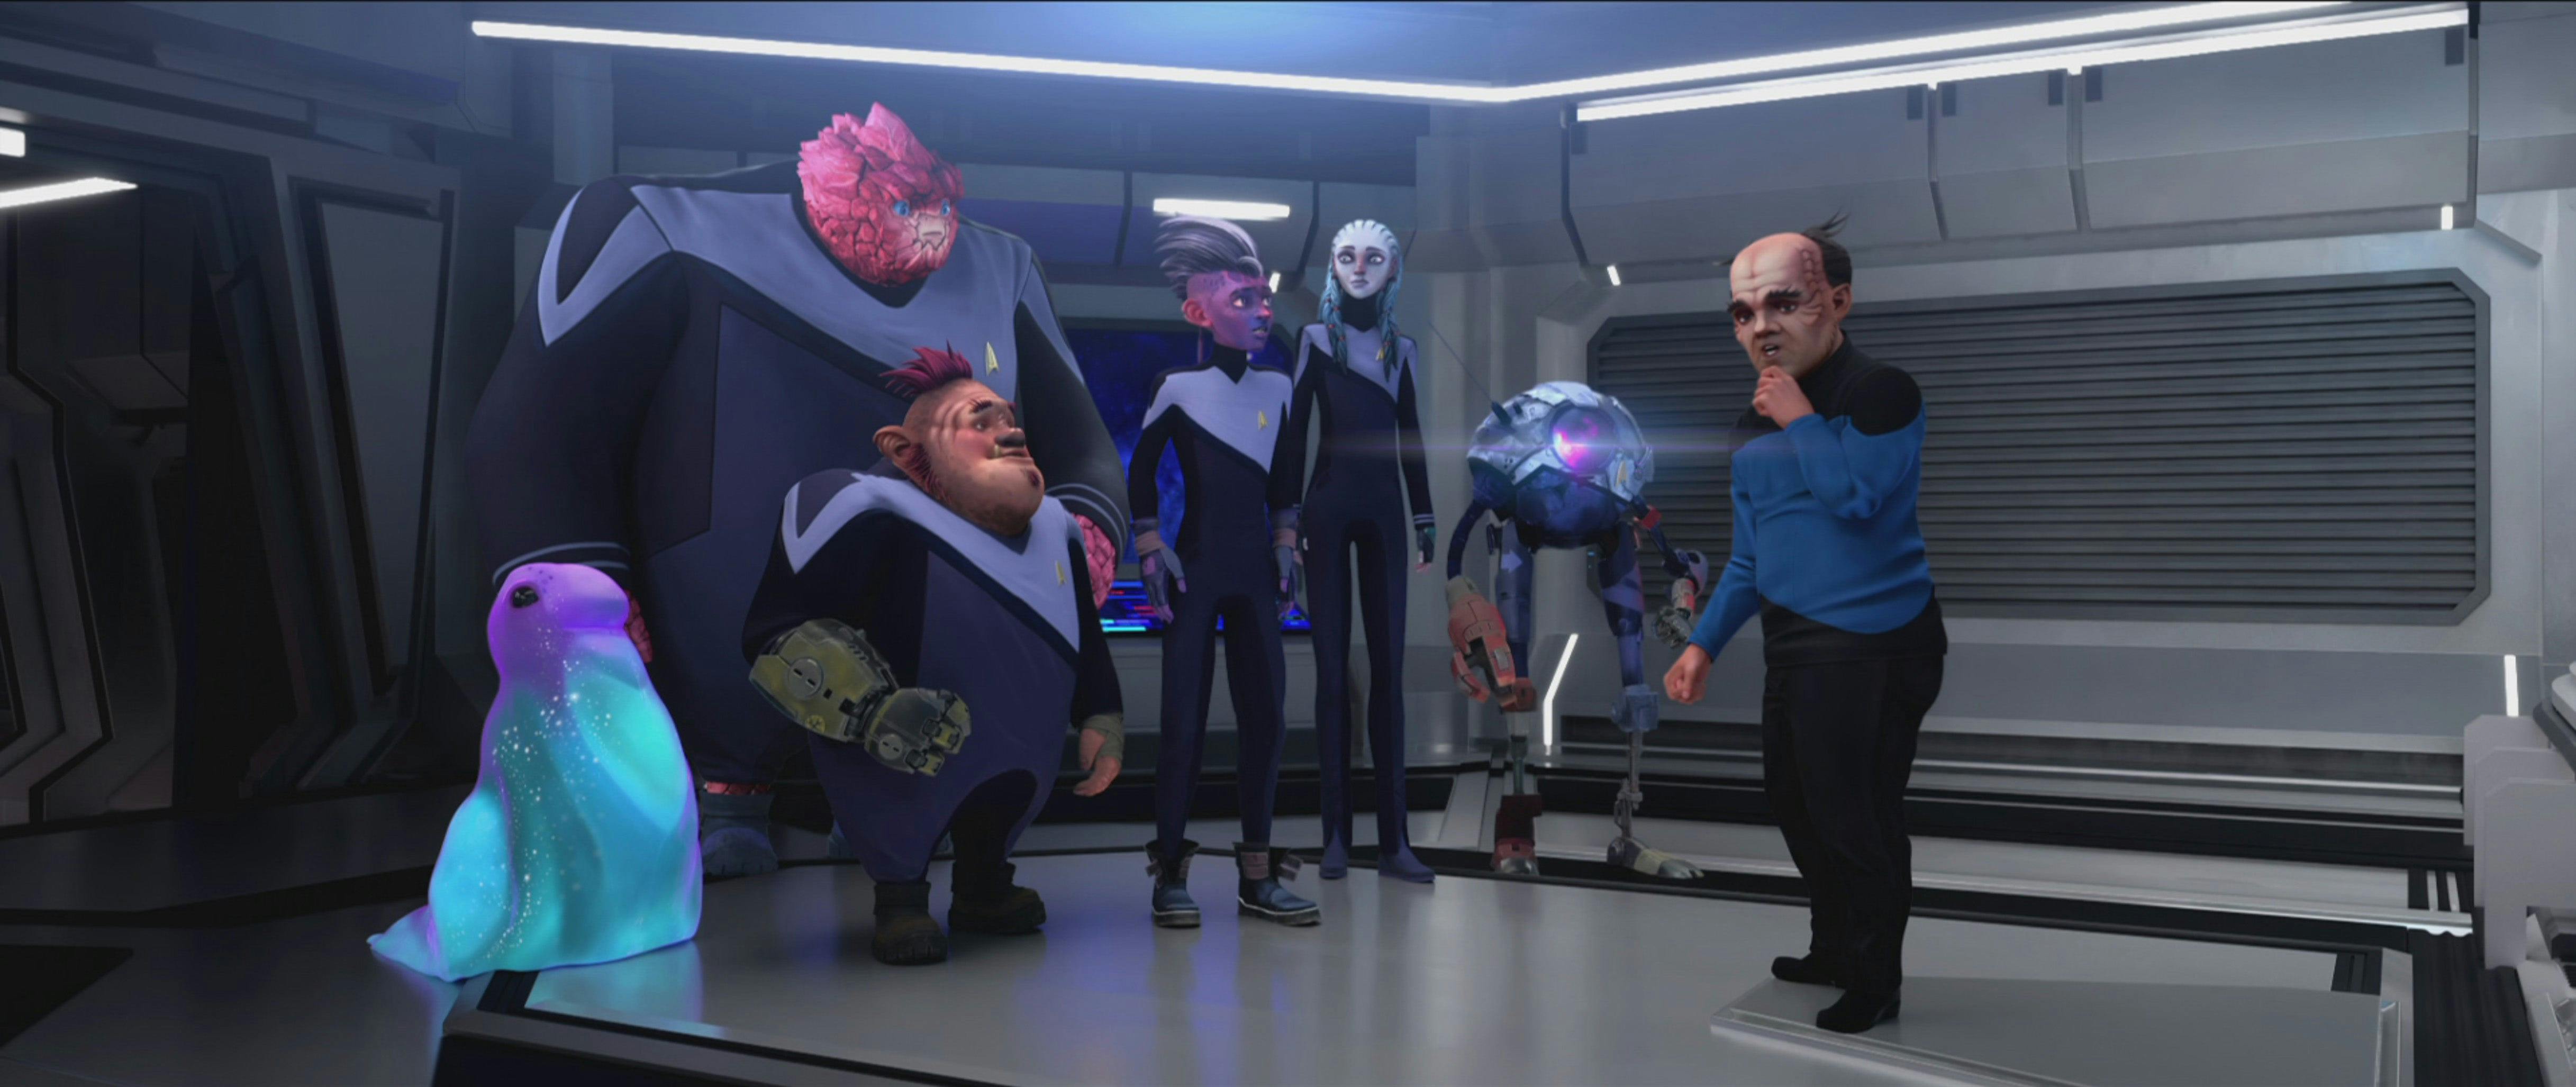 Murf, Rok-Tahk, Jankom Pog, Dal, Gwyn, and Zero stand in front of Barniss Frex at a Starfleet Relay Station in Star Trek: Prodigy